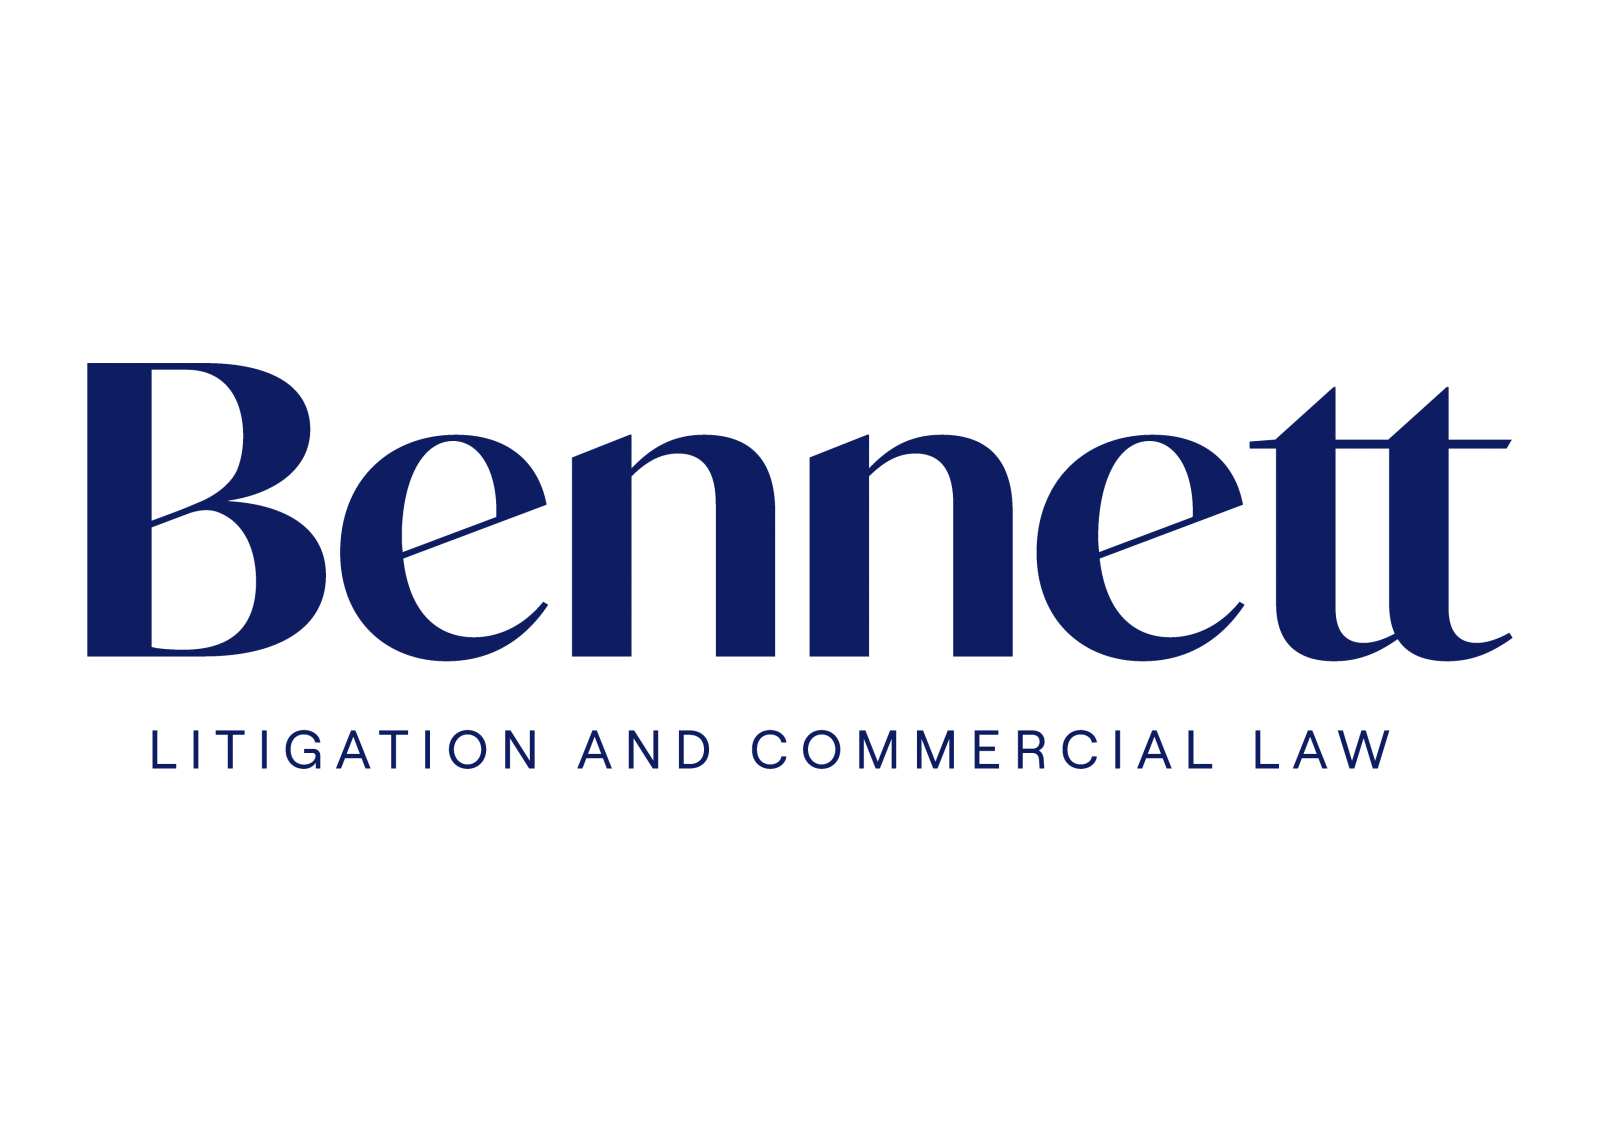 Bennett – Litigation and Commercial Law 